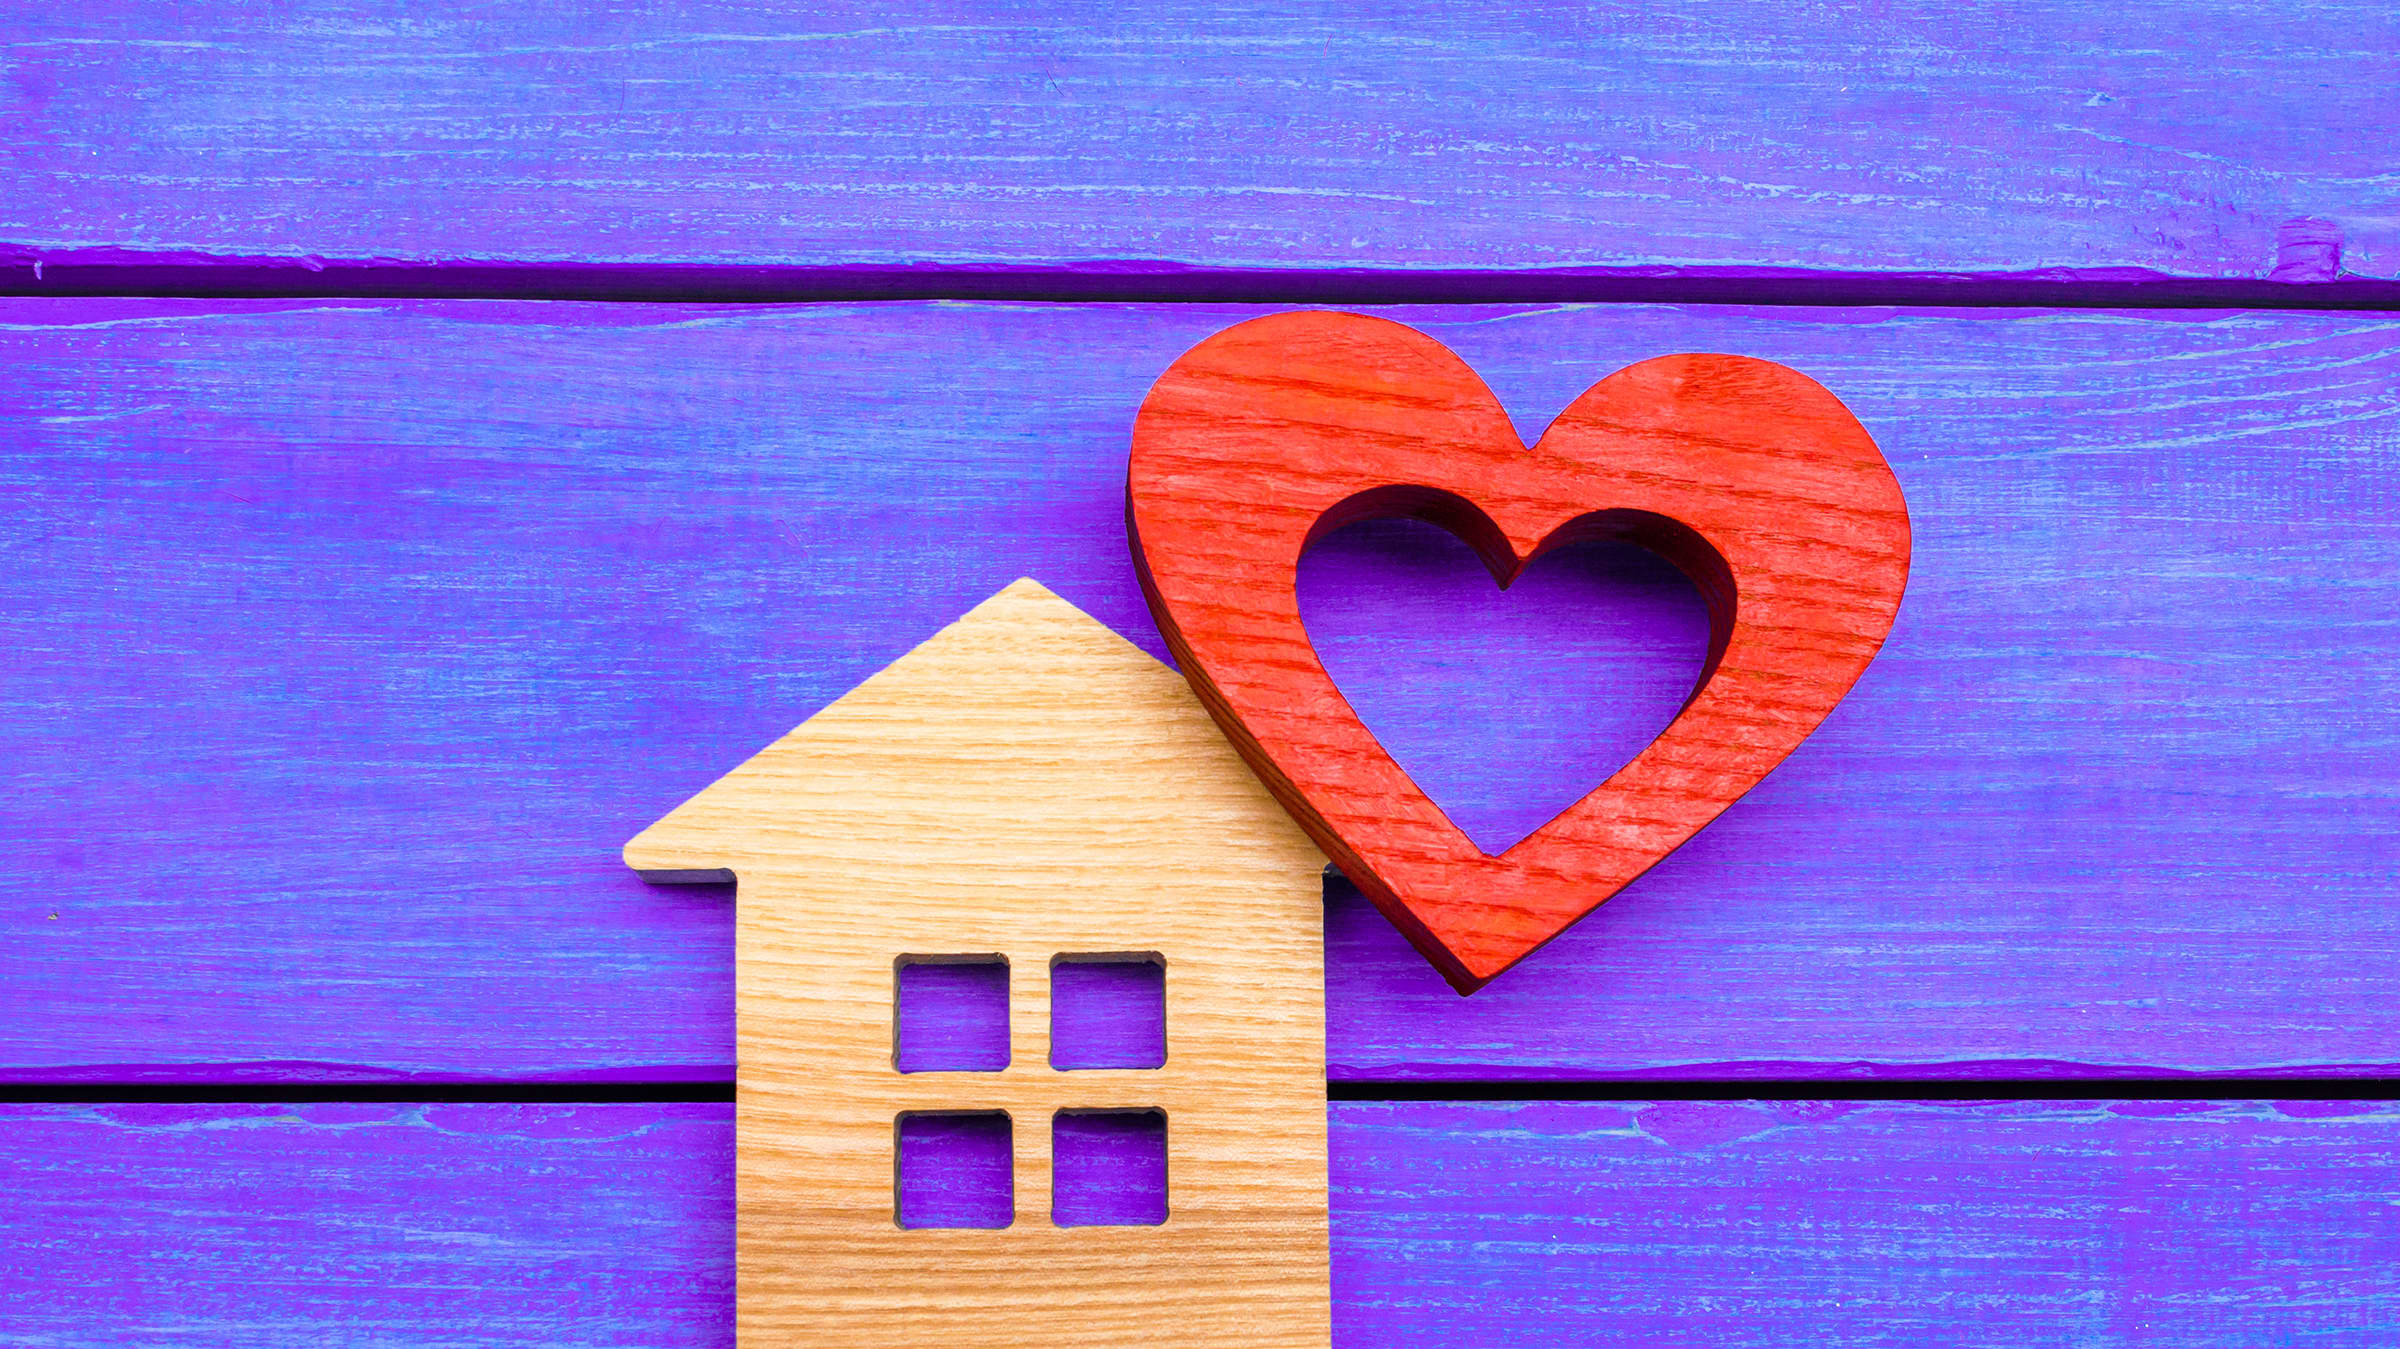 Wooden home cut-out with cut-out wooden heart, symbolizing Yale's home-based care programs